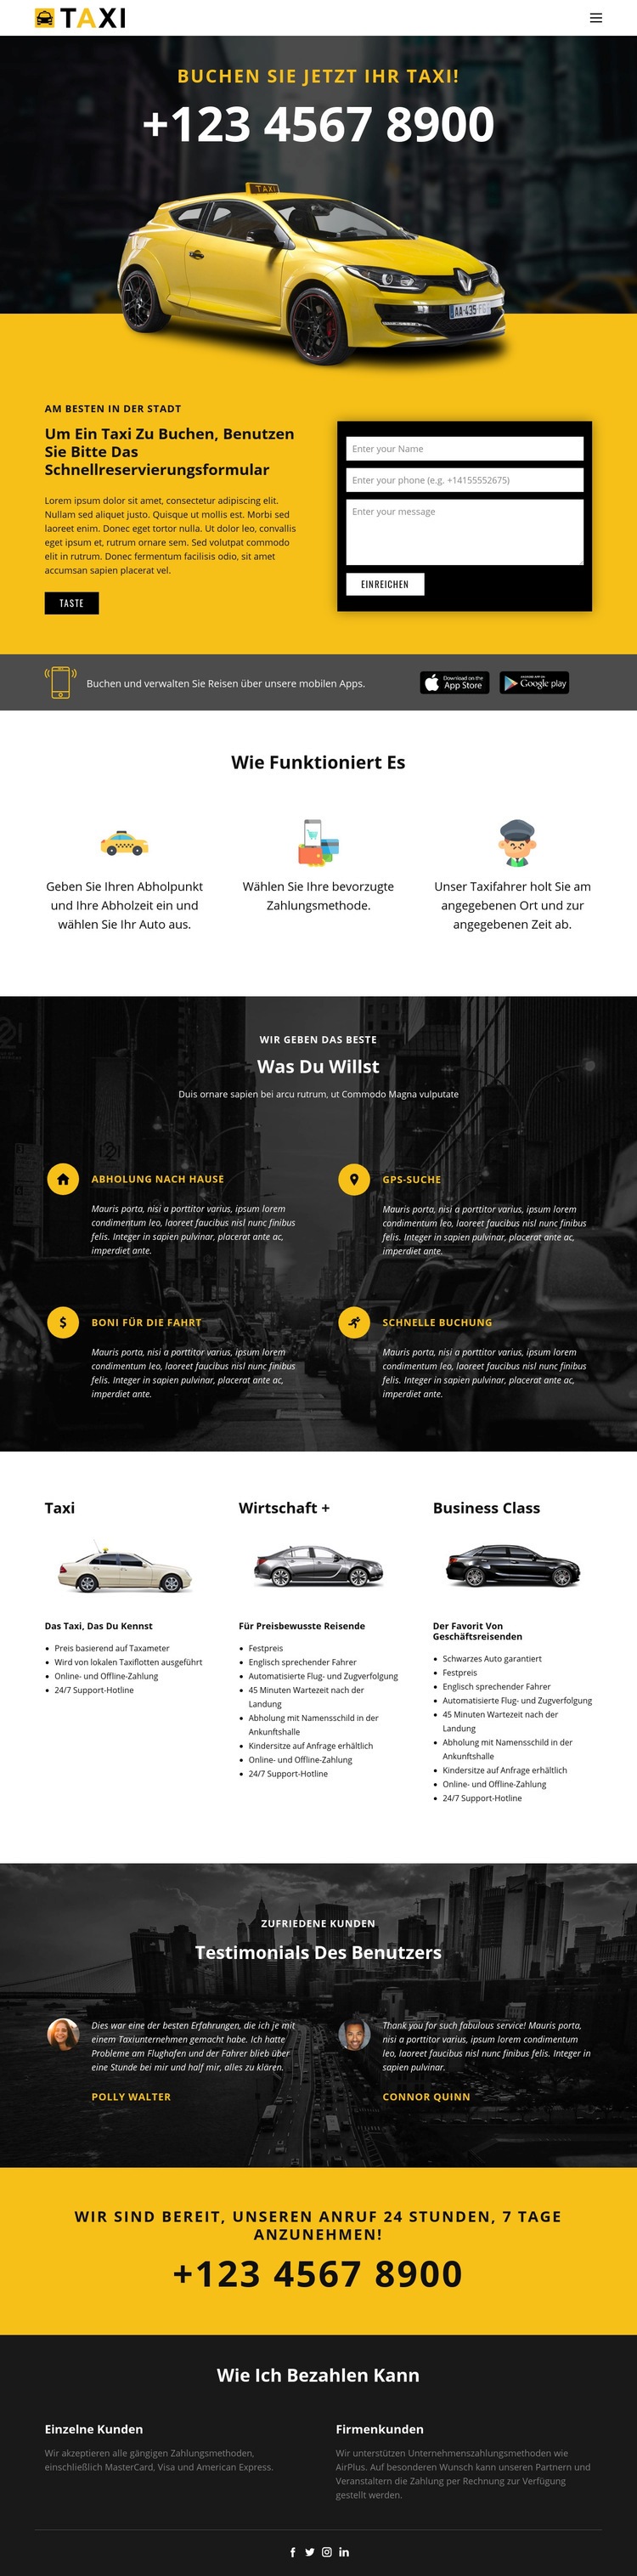 Schnellste Taxis Landing Page